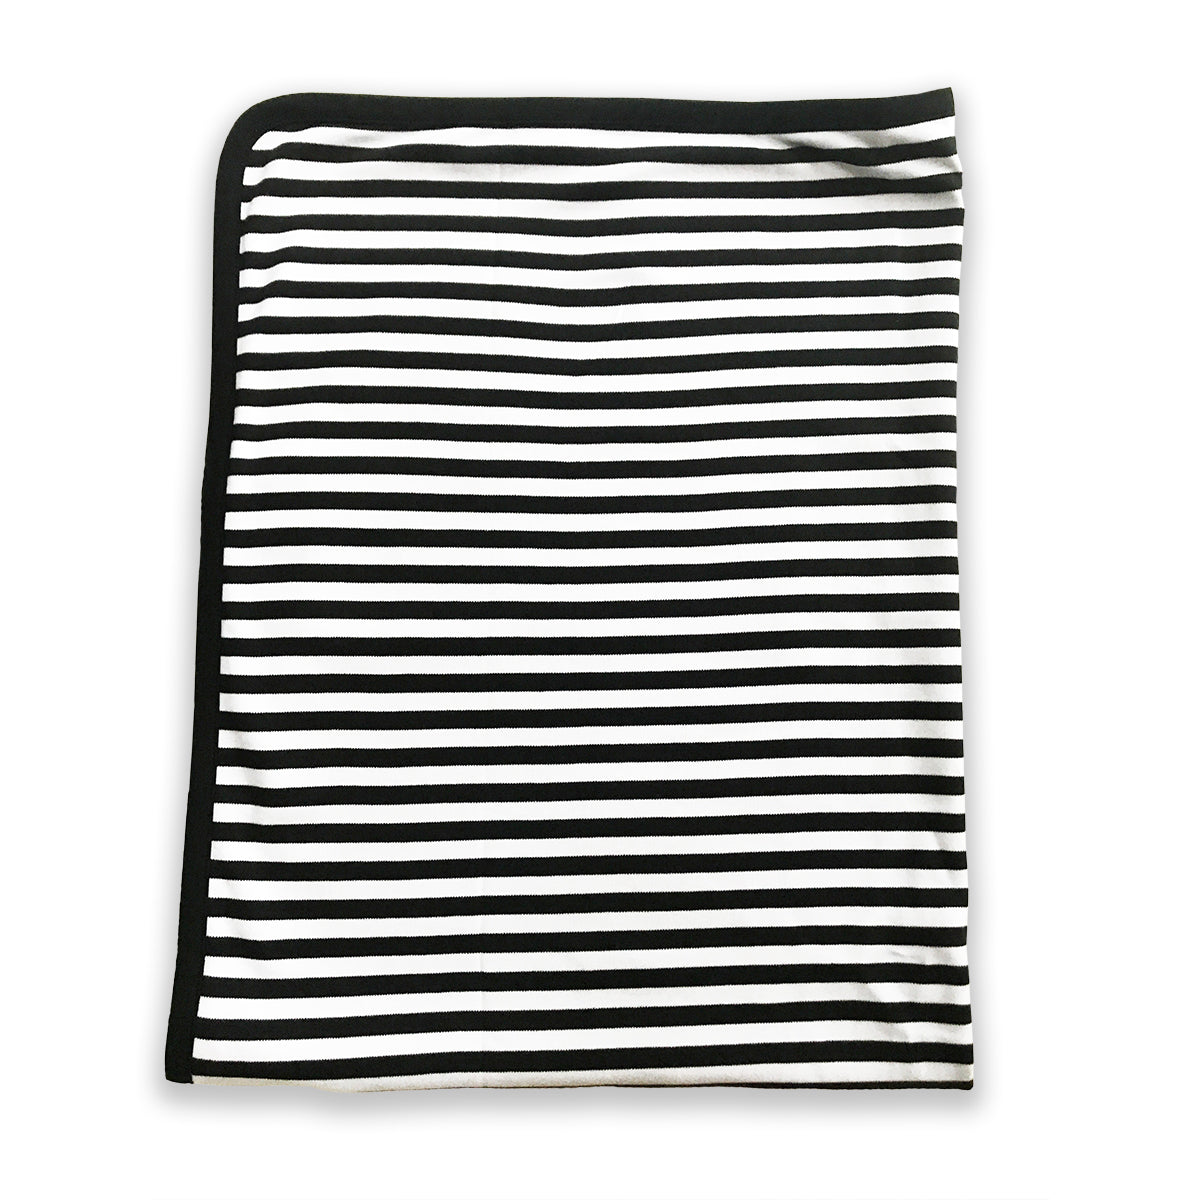 Lazy Baby Organic Cotton Black and White Blanket - Lazy Baby